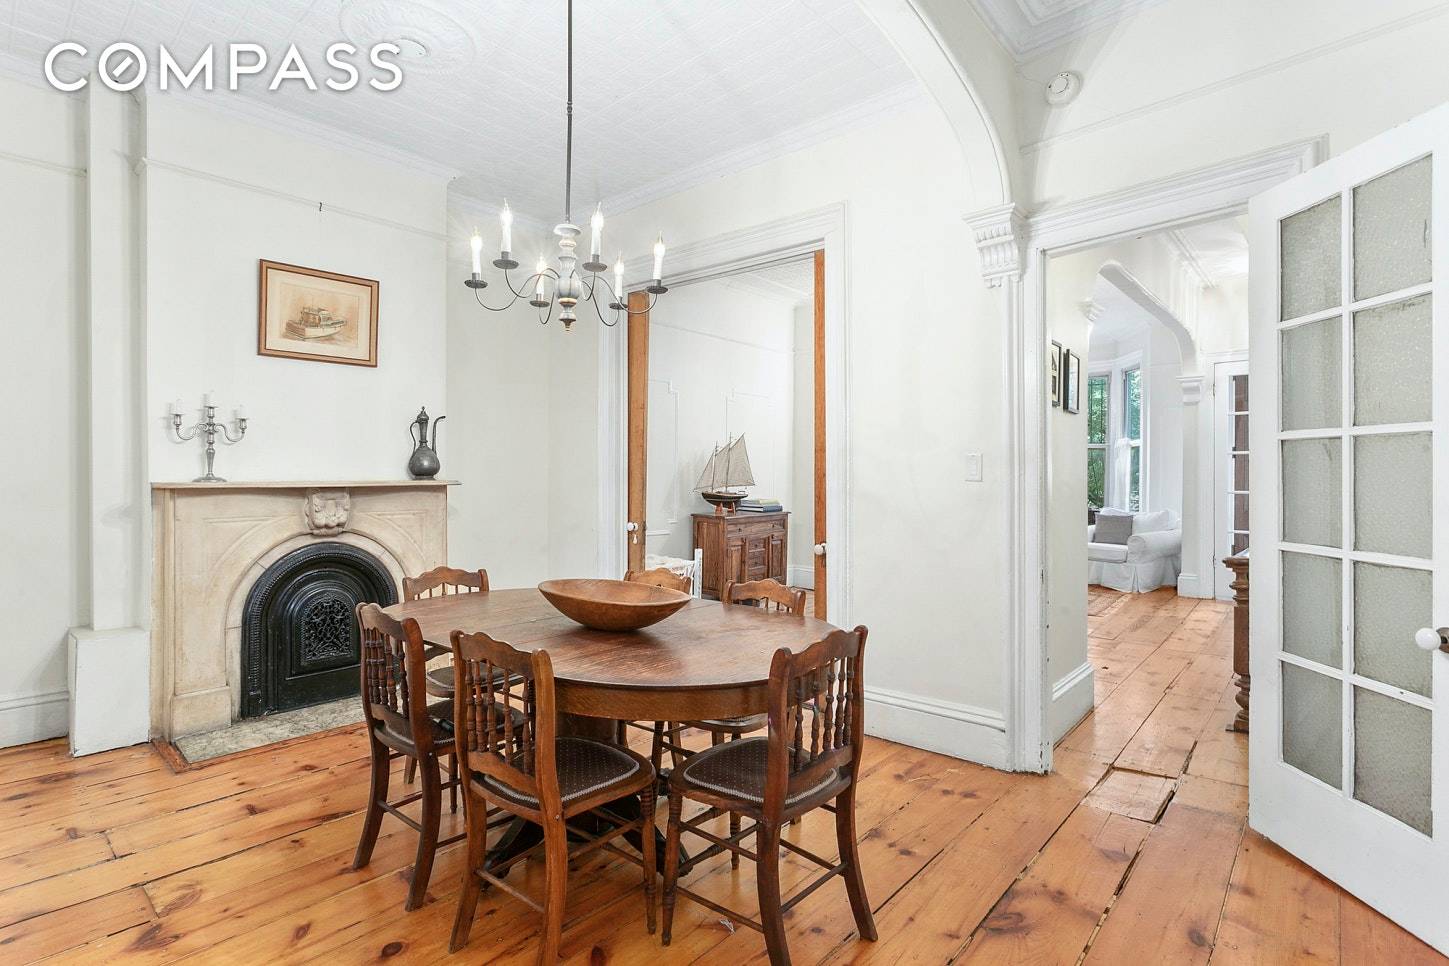 Built in 1872 for Charles Pannell, an English sea captain and shipmaster, 202 15th Street is a beautifully renovated Italianate clapboard townhouse on a great community oriented Park Slope block.